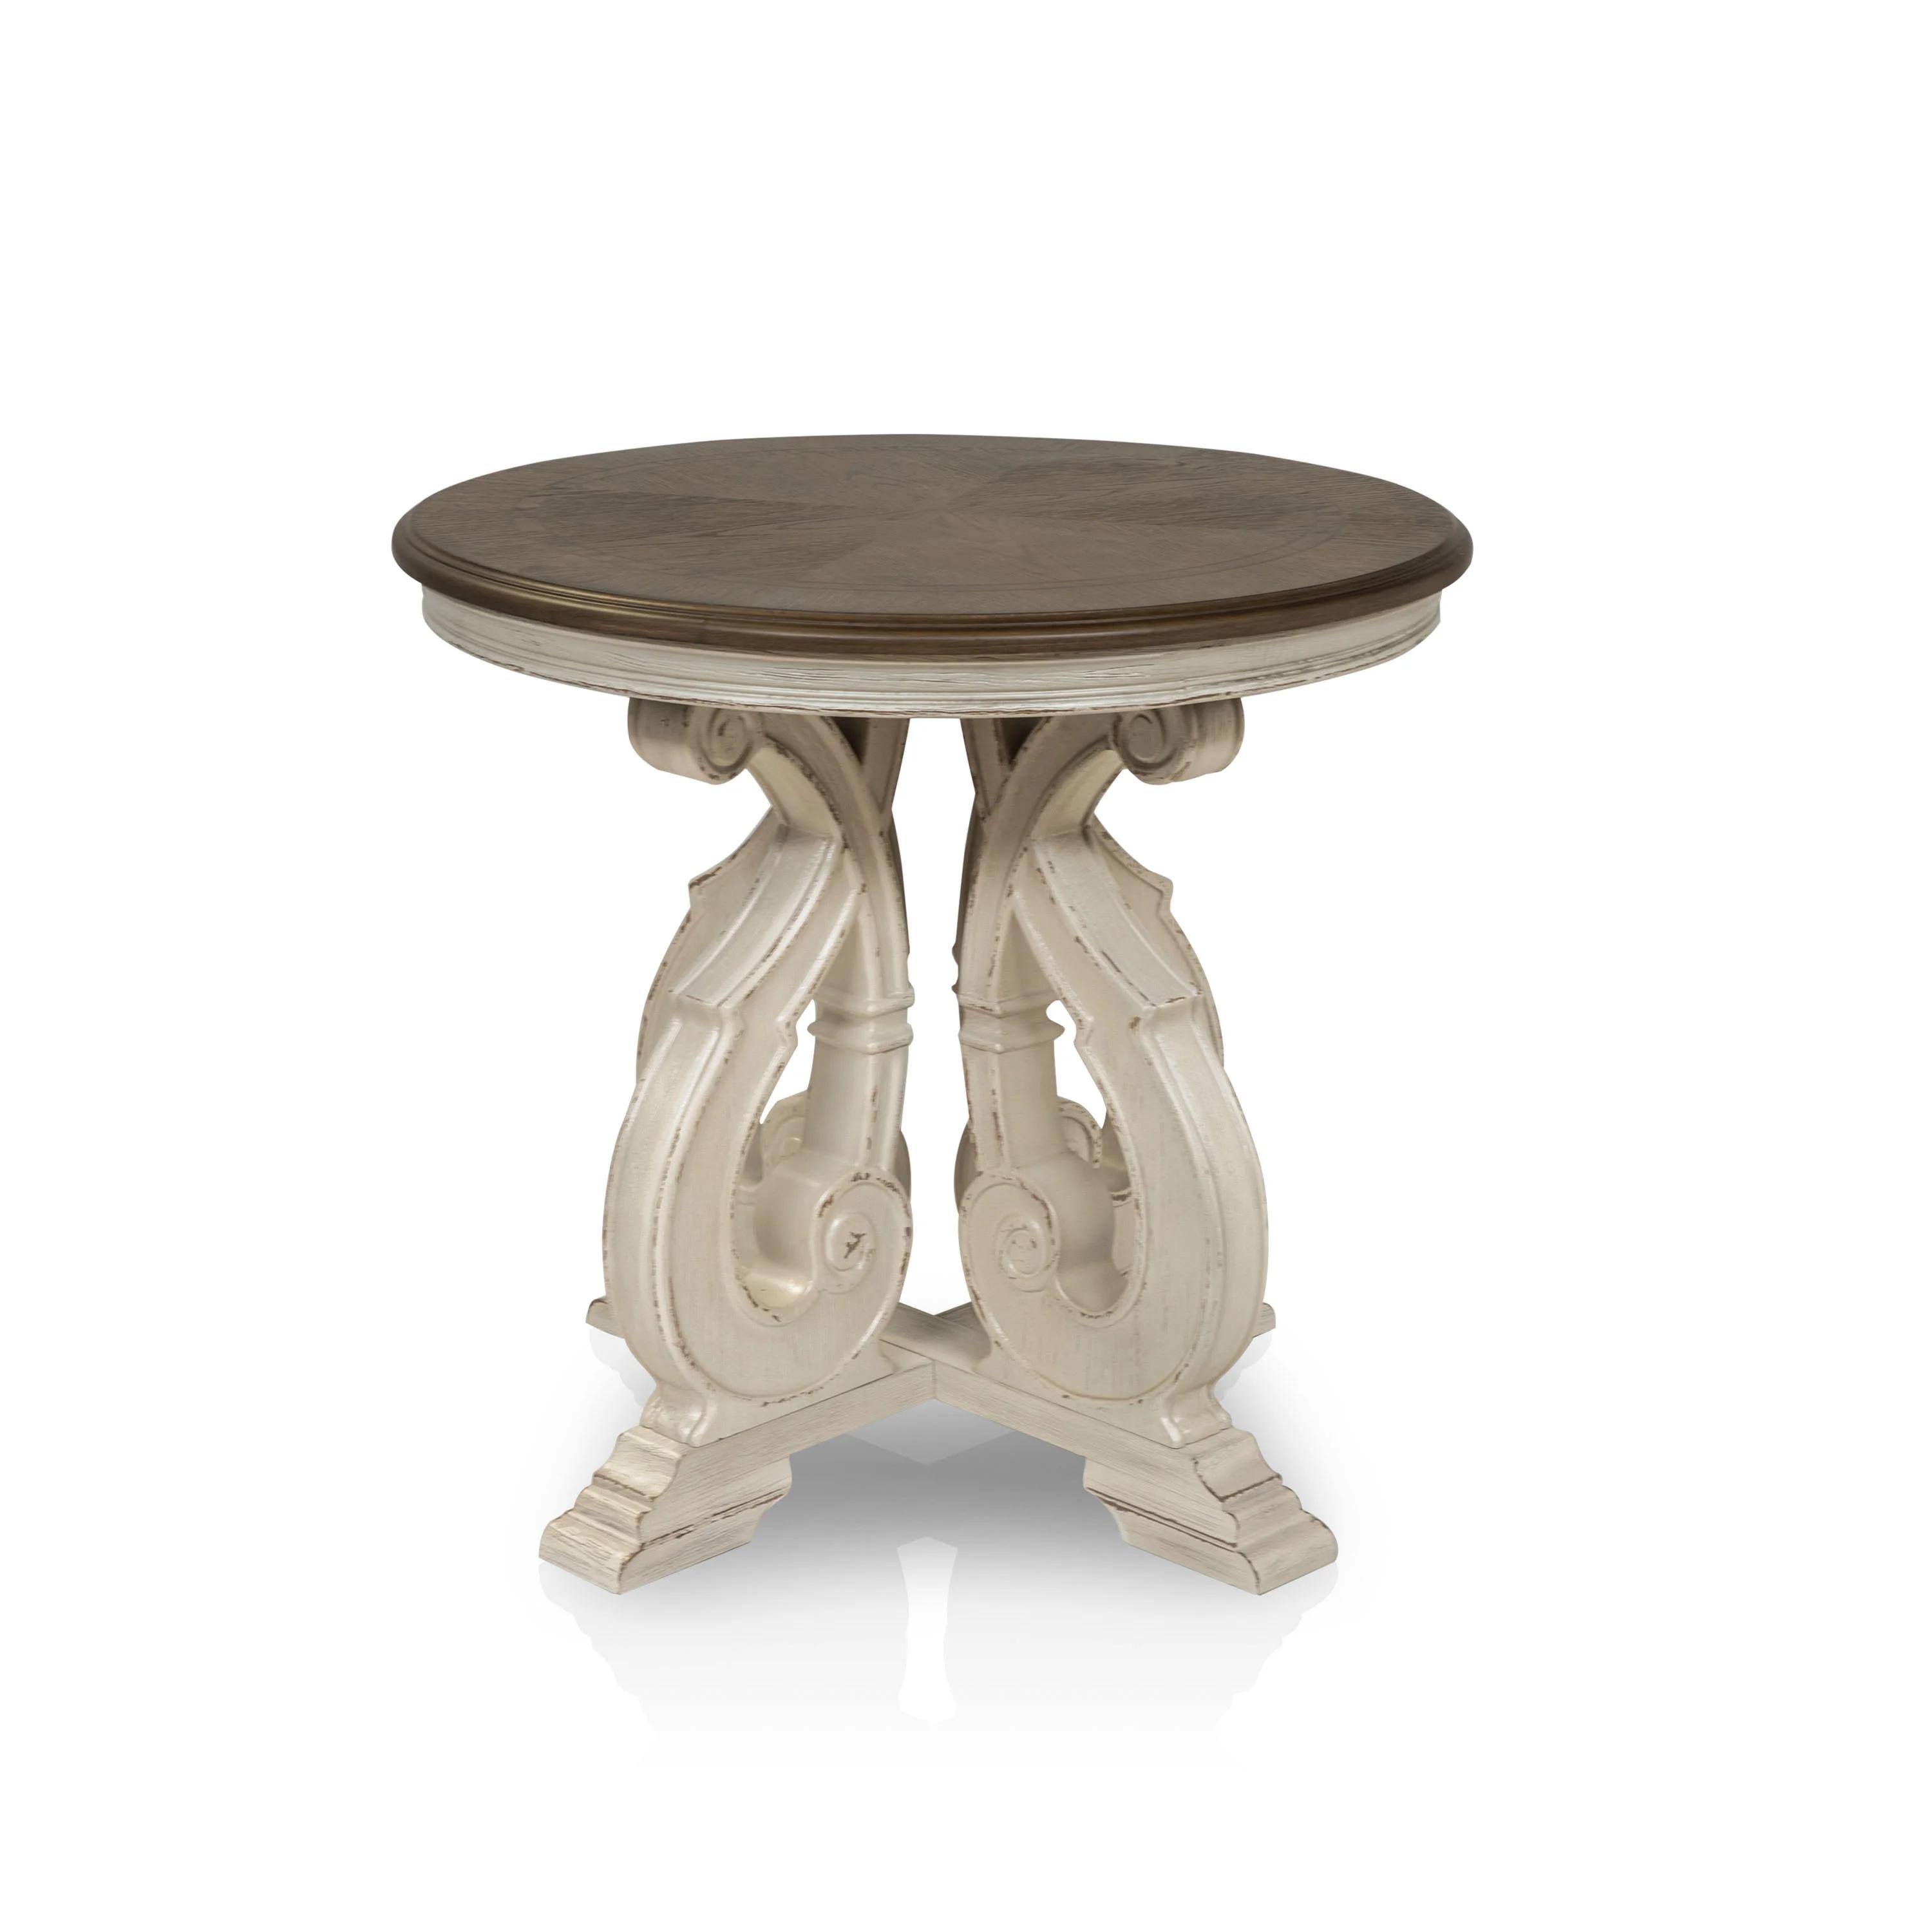 Classic, Traditional End Table Clementine 4148-02 in Oak, Antique White 